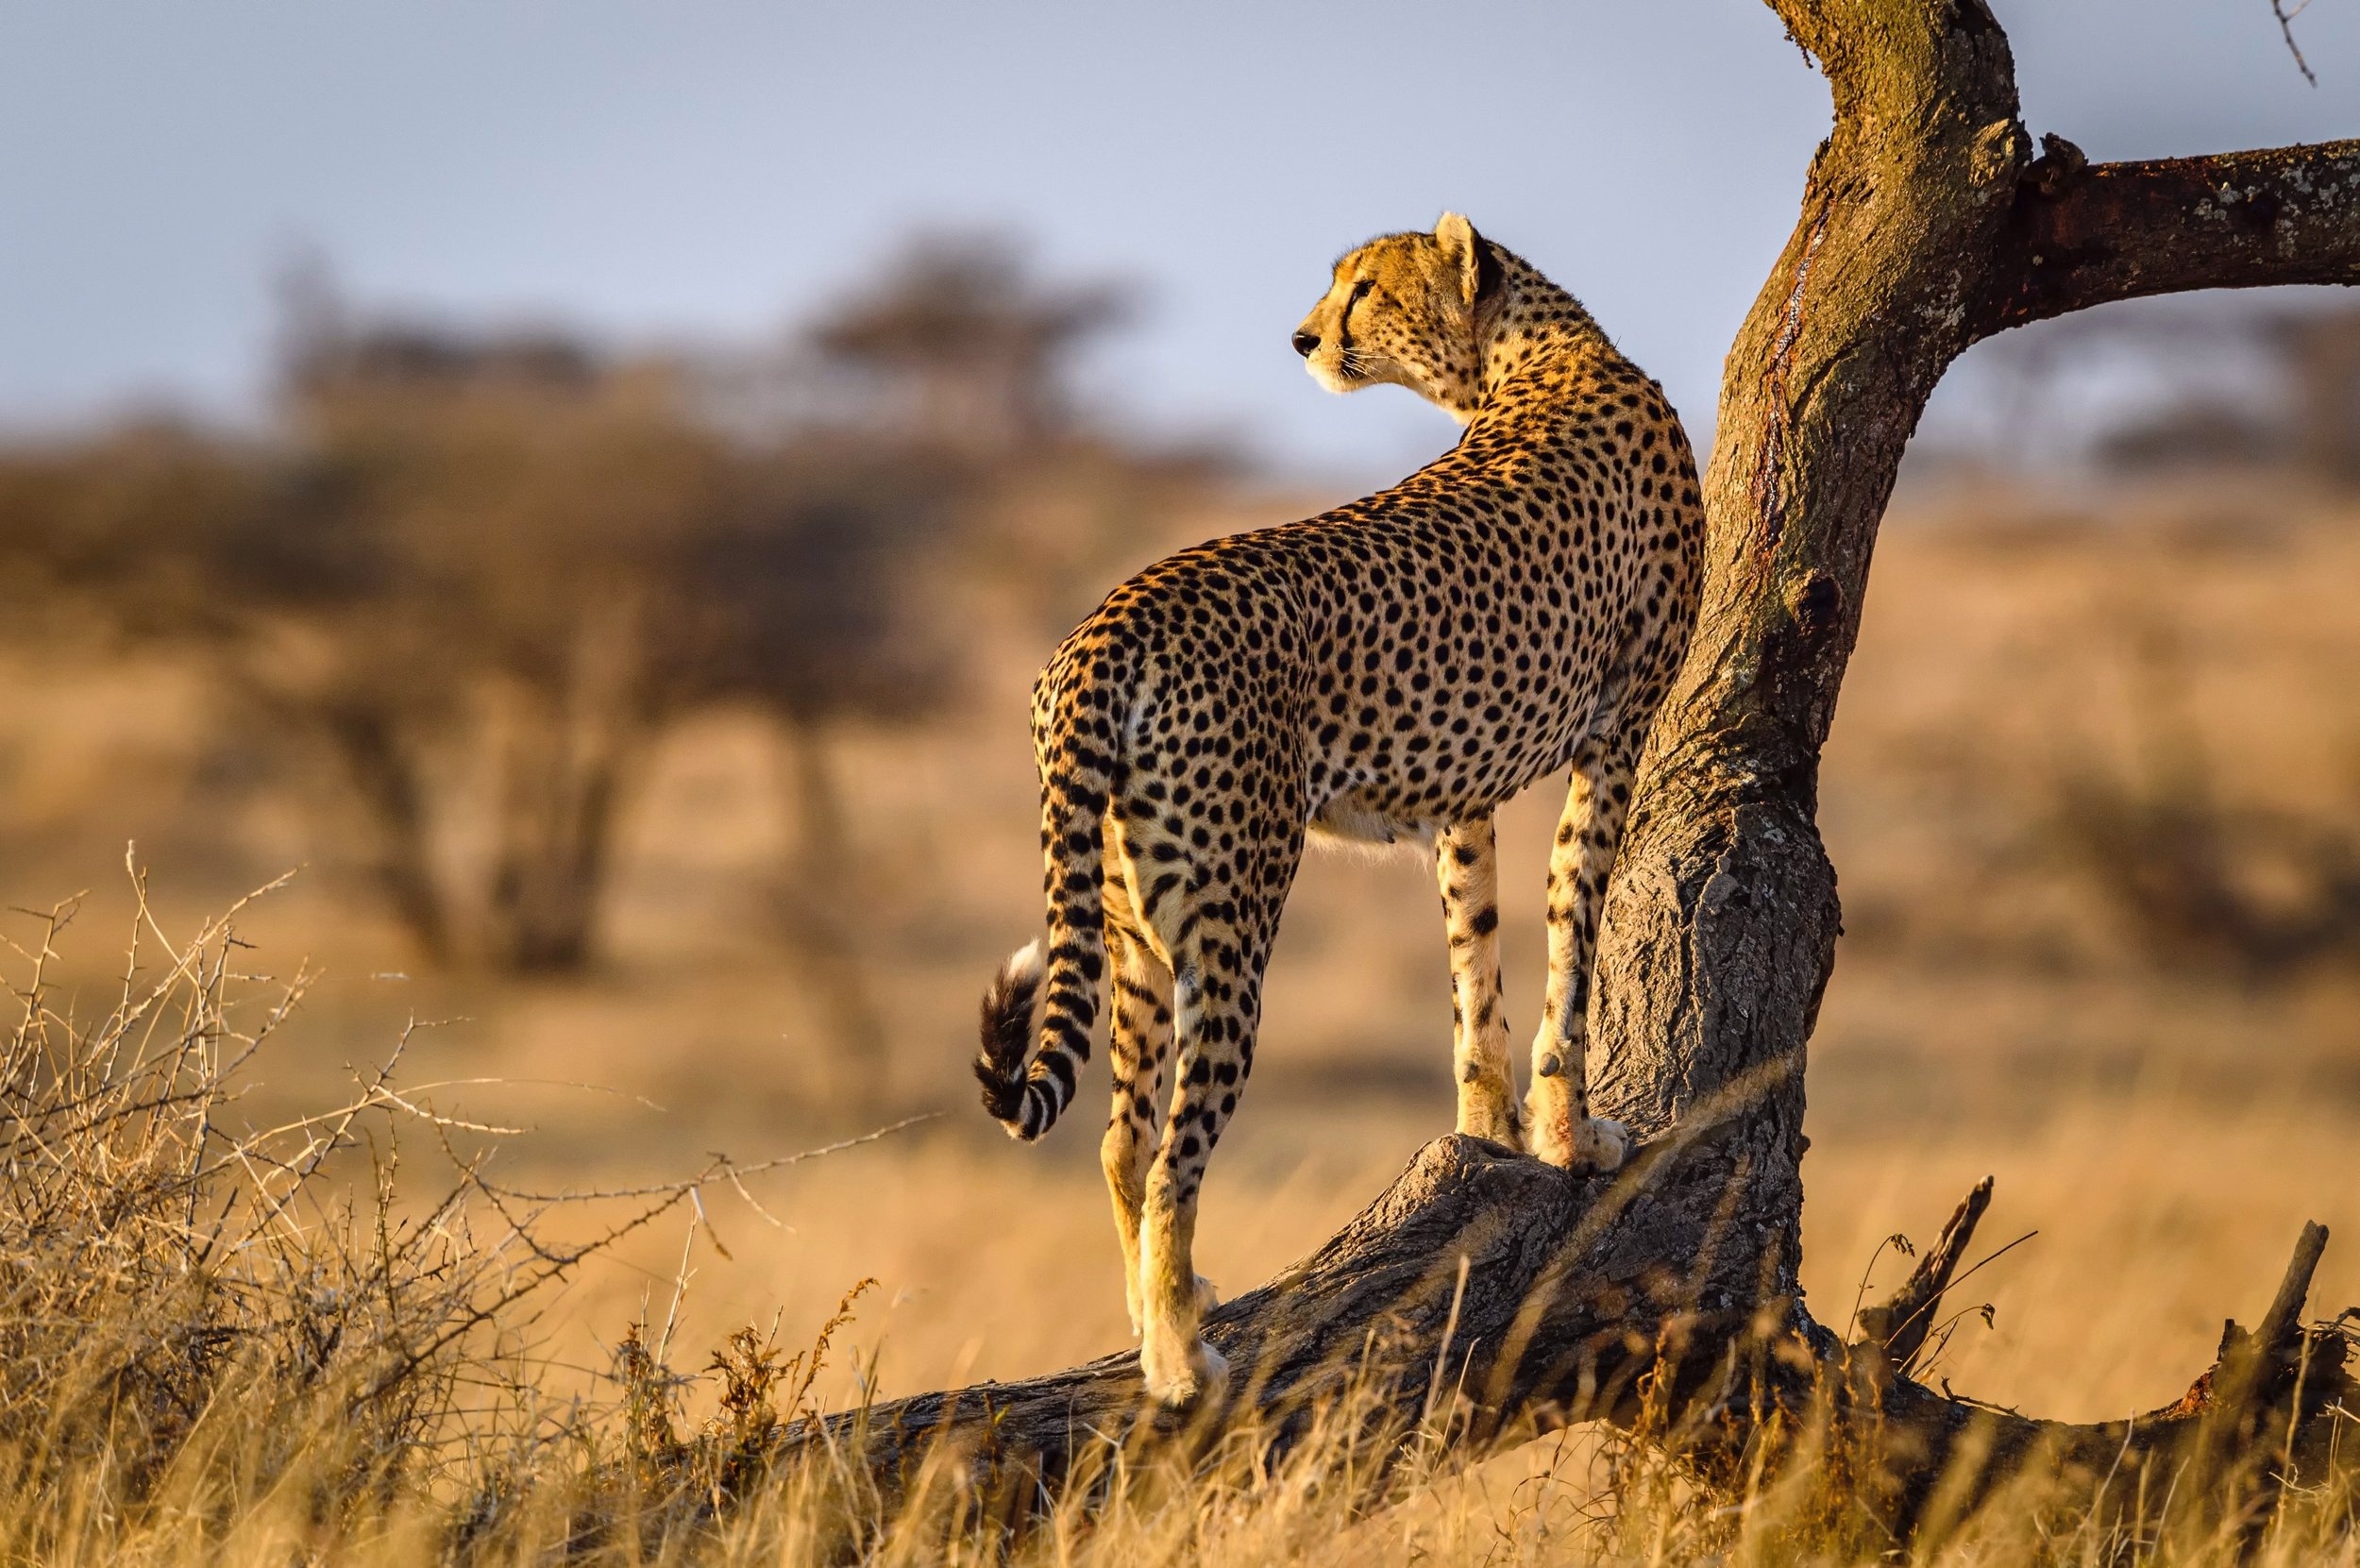 Cheetah research project, Conservation efforts, Wildlife publication, Important news, 2500x1670 HD Desktop